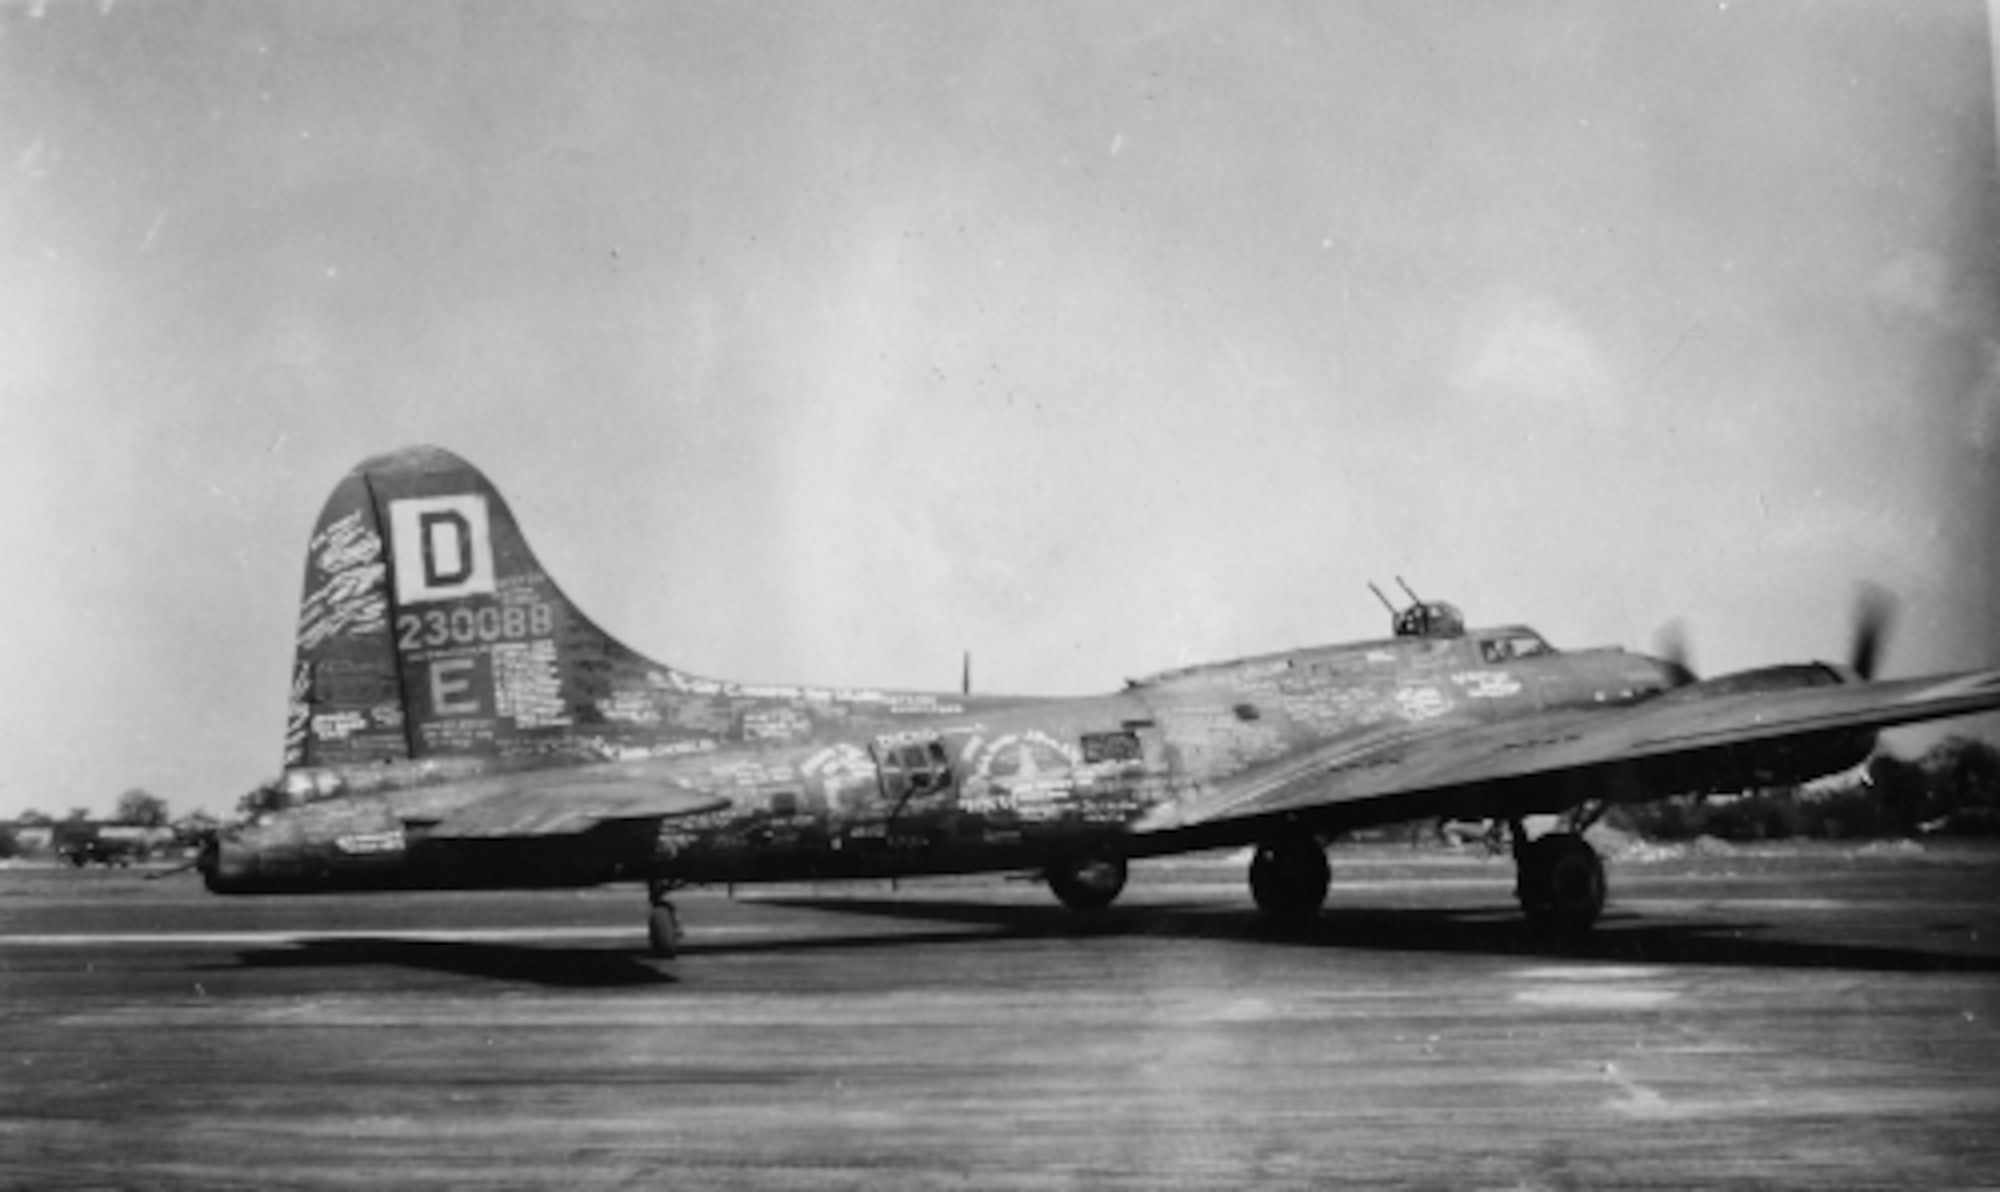 The original “Squawkin Hawk,” a B-17 Flying Fortress from World War II, was the first in the 100th Bomb Group to complete 50 combat missions. Built in Seattle, it was one of a 100-plane production block – a whole group of four-engine B-17 bombers manufactured to the set of design specifications between the end of March and beginning of April 1943. On Oct. 10, 2023, 80 years since the original first flew, the 100th Air Refueling Wing unveiled their latest heritage nose art, “Squawkin Hawk,” on one of KC-135 Stratotankers at Royal Air Force Mildenhall, England, with family members of the original World War II crew in attendance. (Courtesy photo from 100th Bomb Group Foundation archives and Elder family)